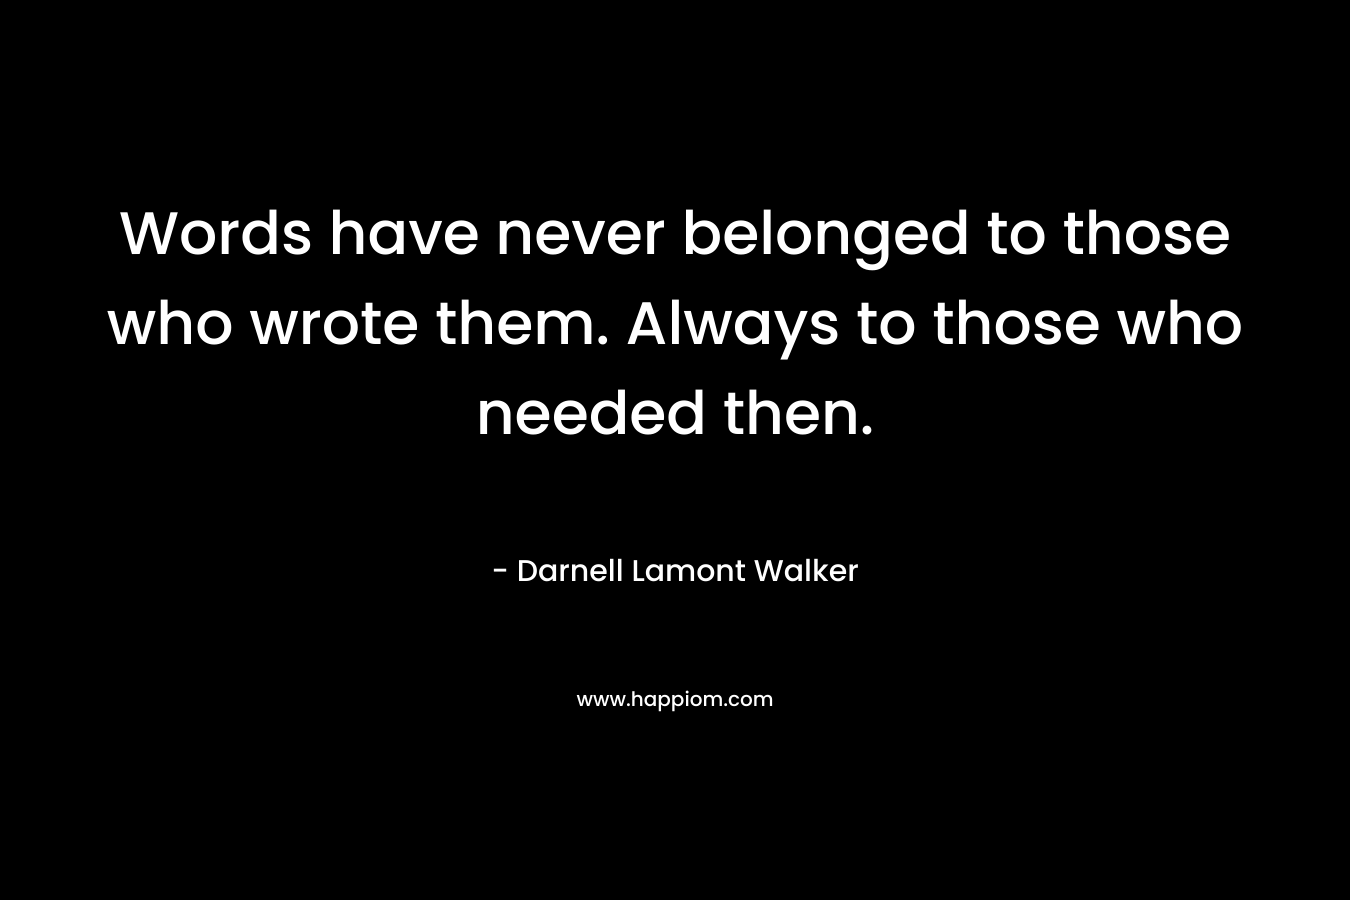 Words have never belonged to those who wrote them. Always to those who needed then.